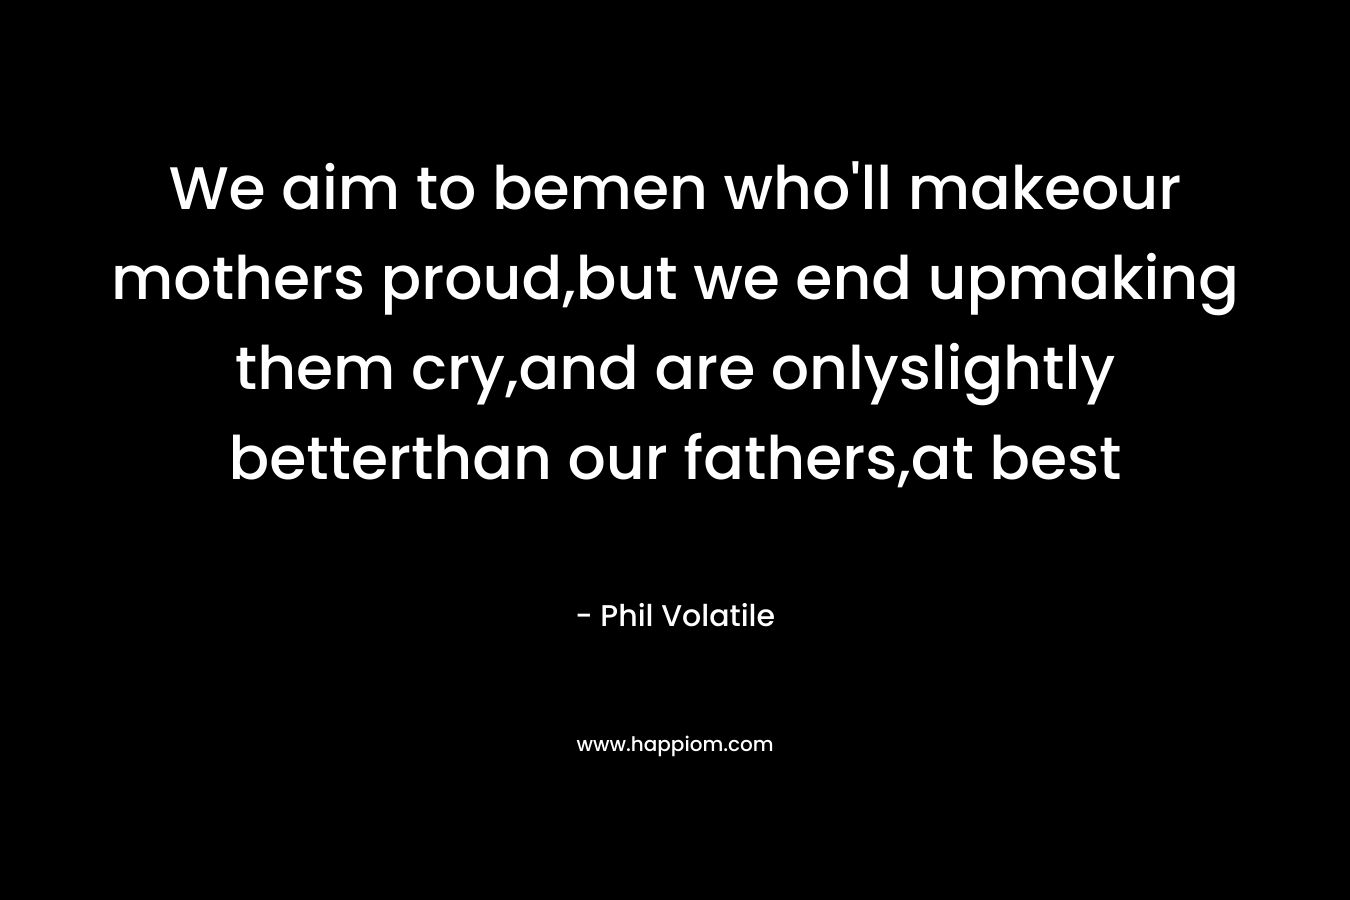 We aim to bemen who'll makeour mothers proud,but we end upmaking them cry,and are onlyslightly betterthan our fathers,at best